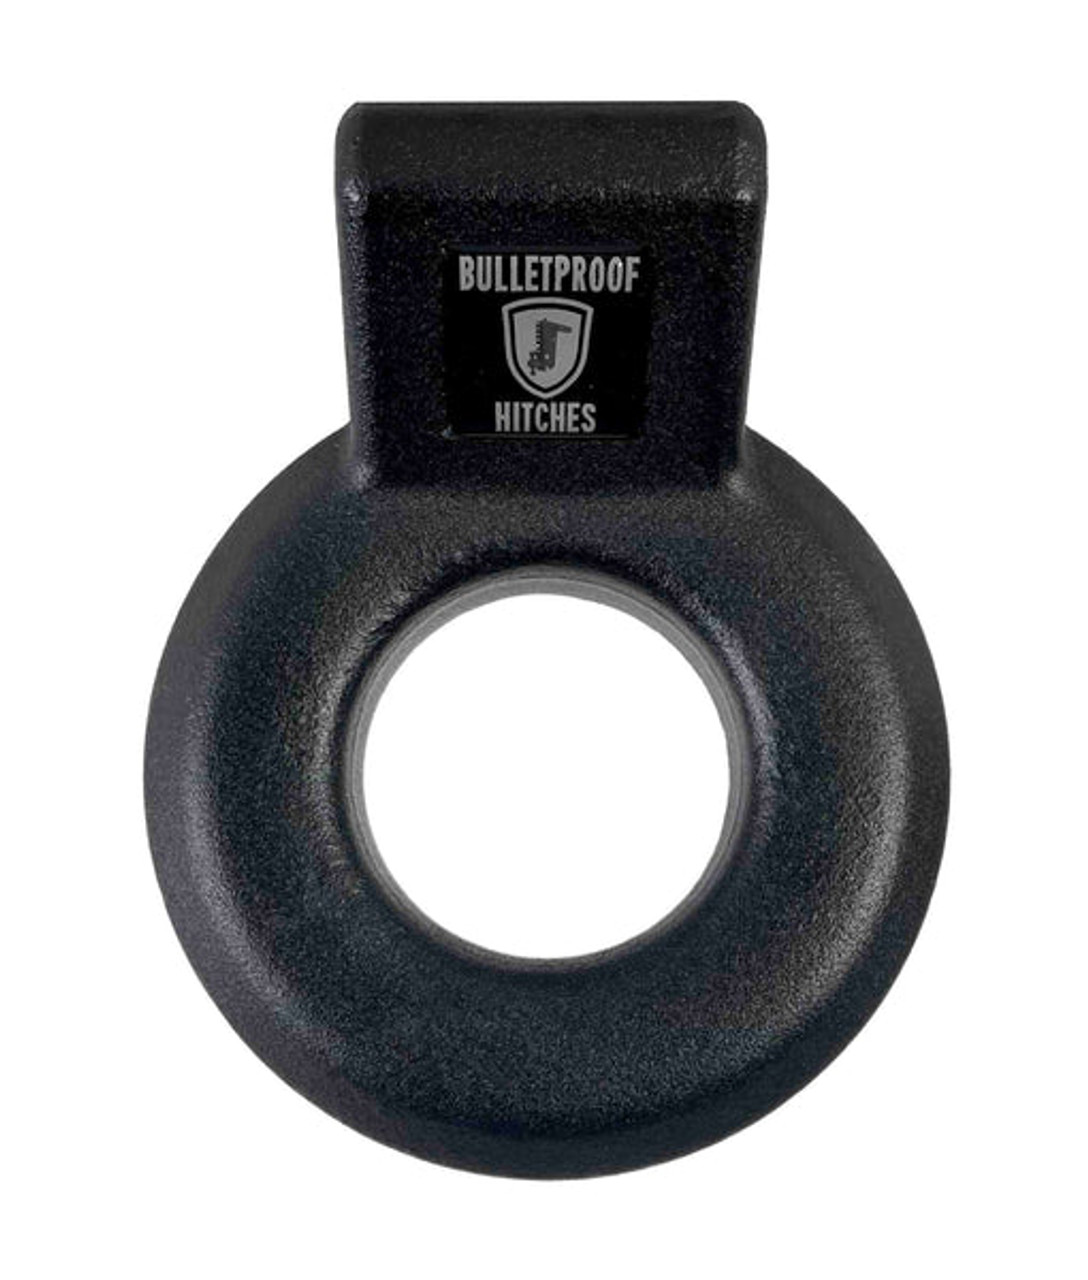 Bulletproof Hitch Loop (Lunette Ring) Attachment